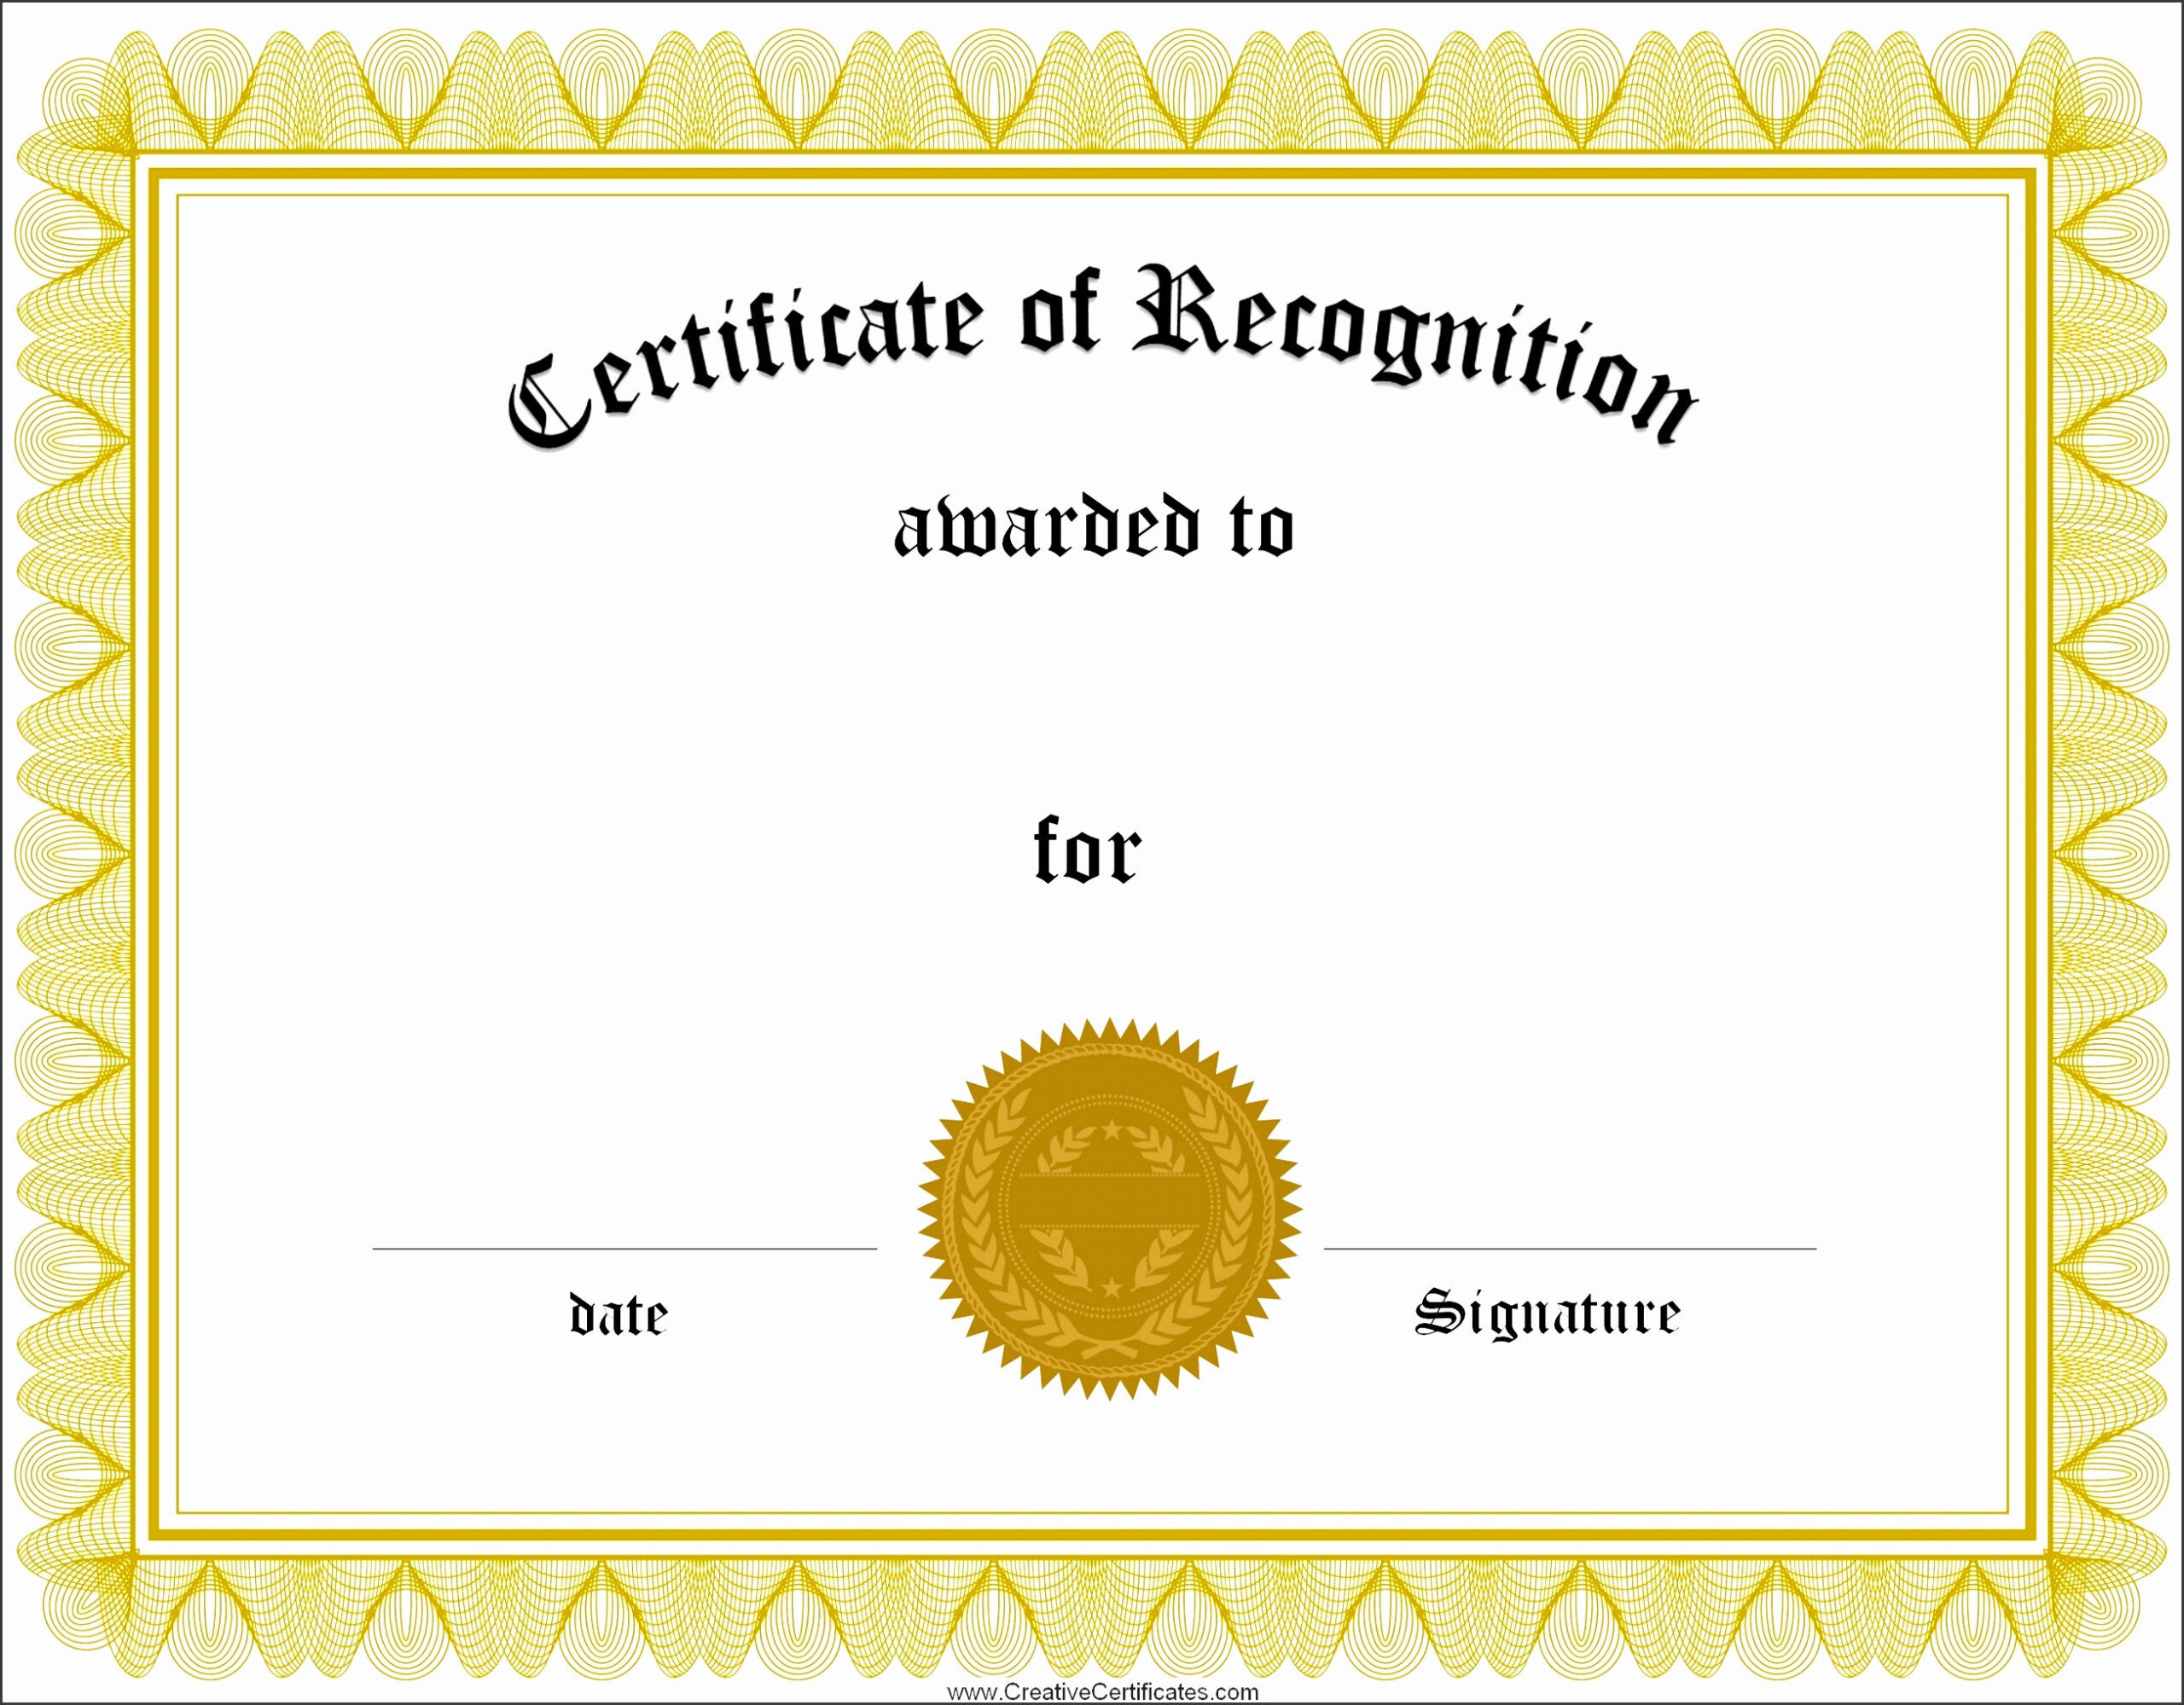 8 Easy To Use Certificate Of Appreciation Template - Sampletemplatess inside New Certificate Of Recognition Word Template